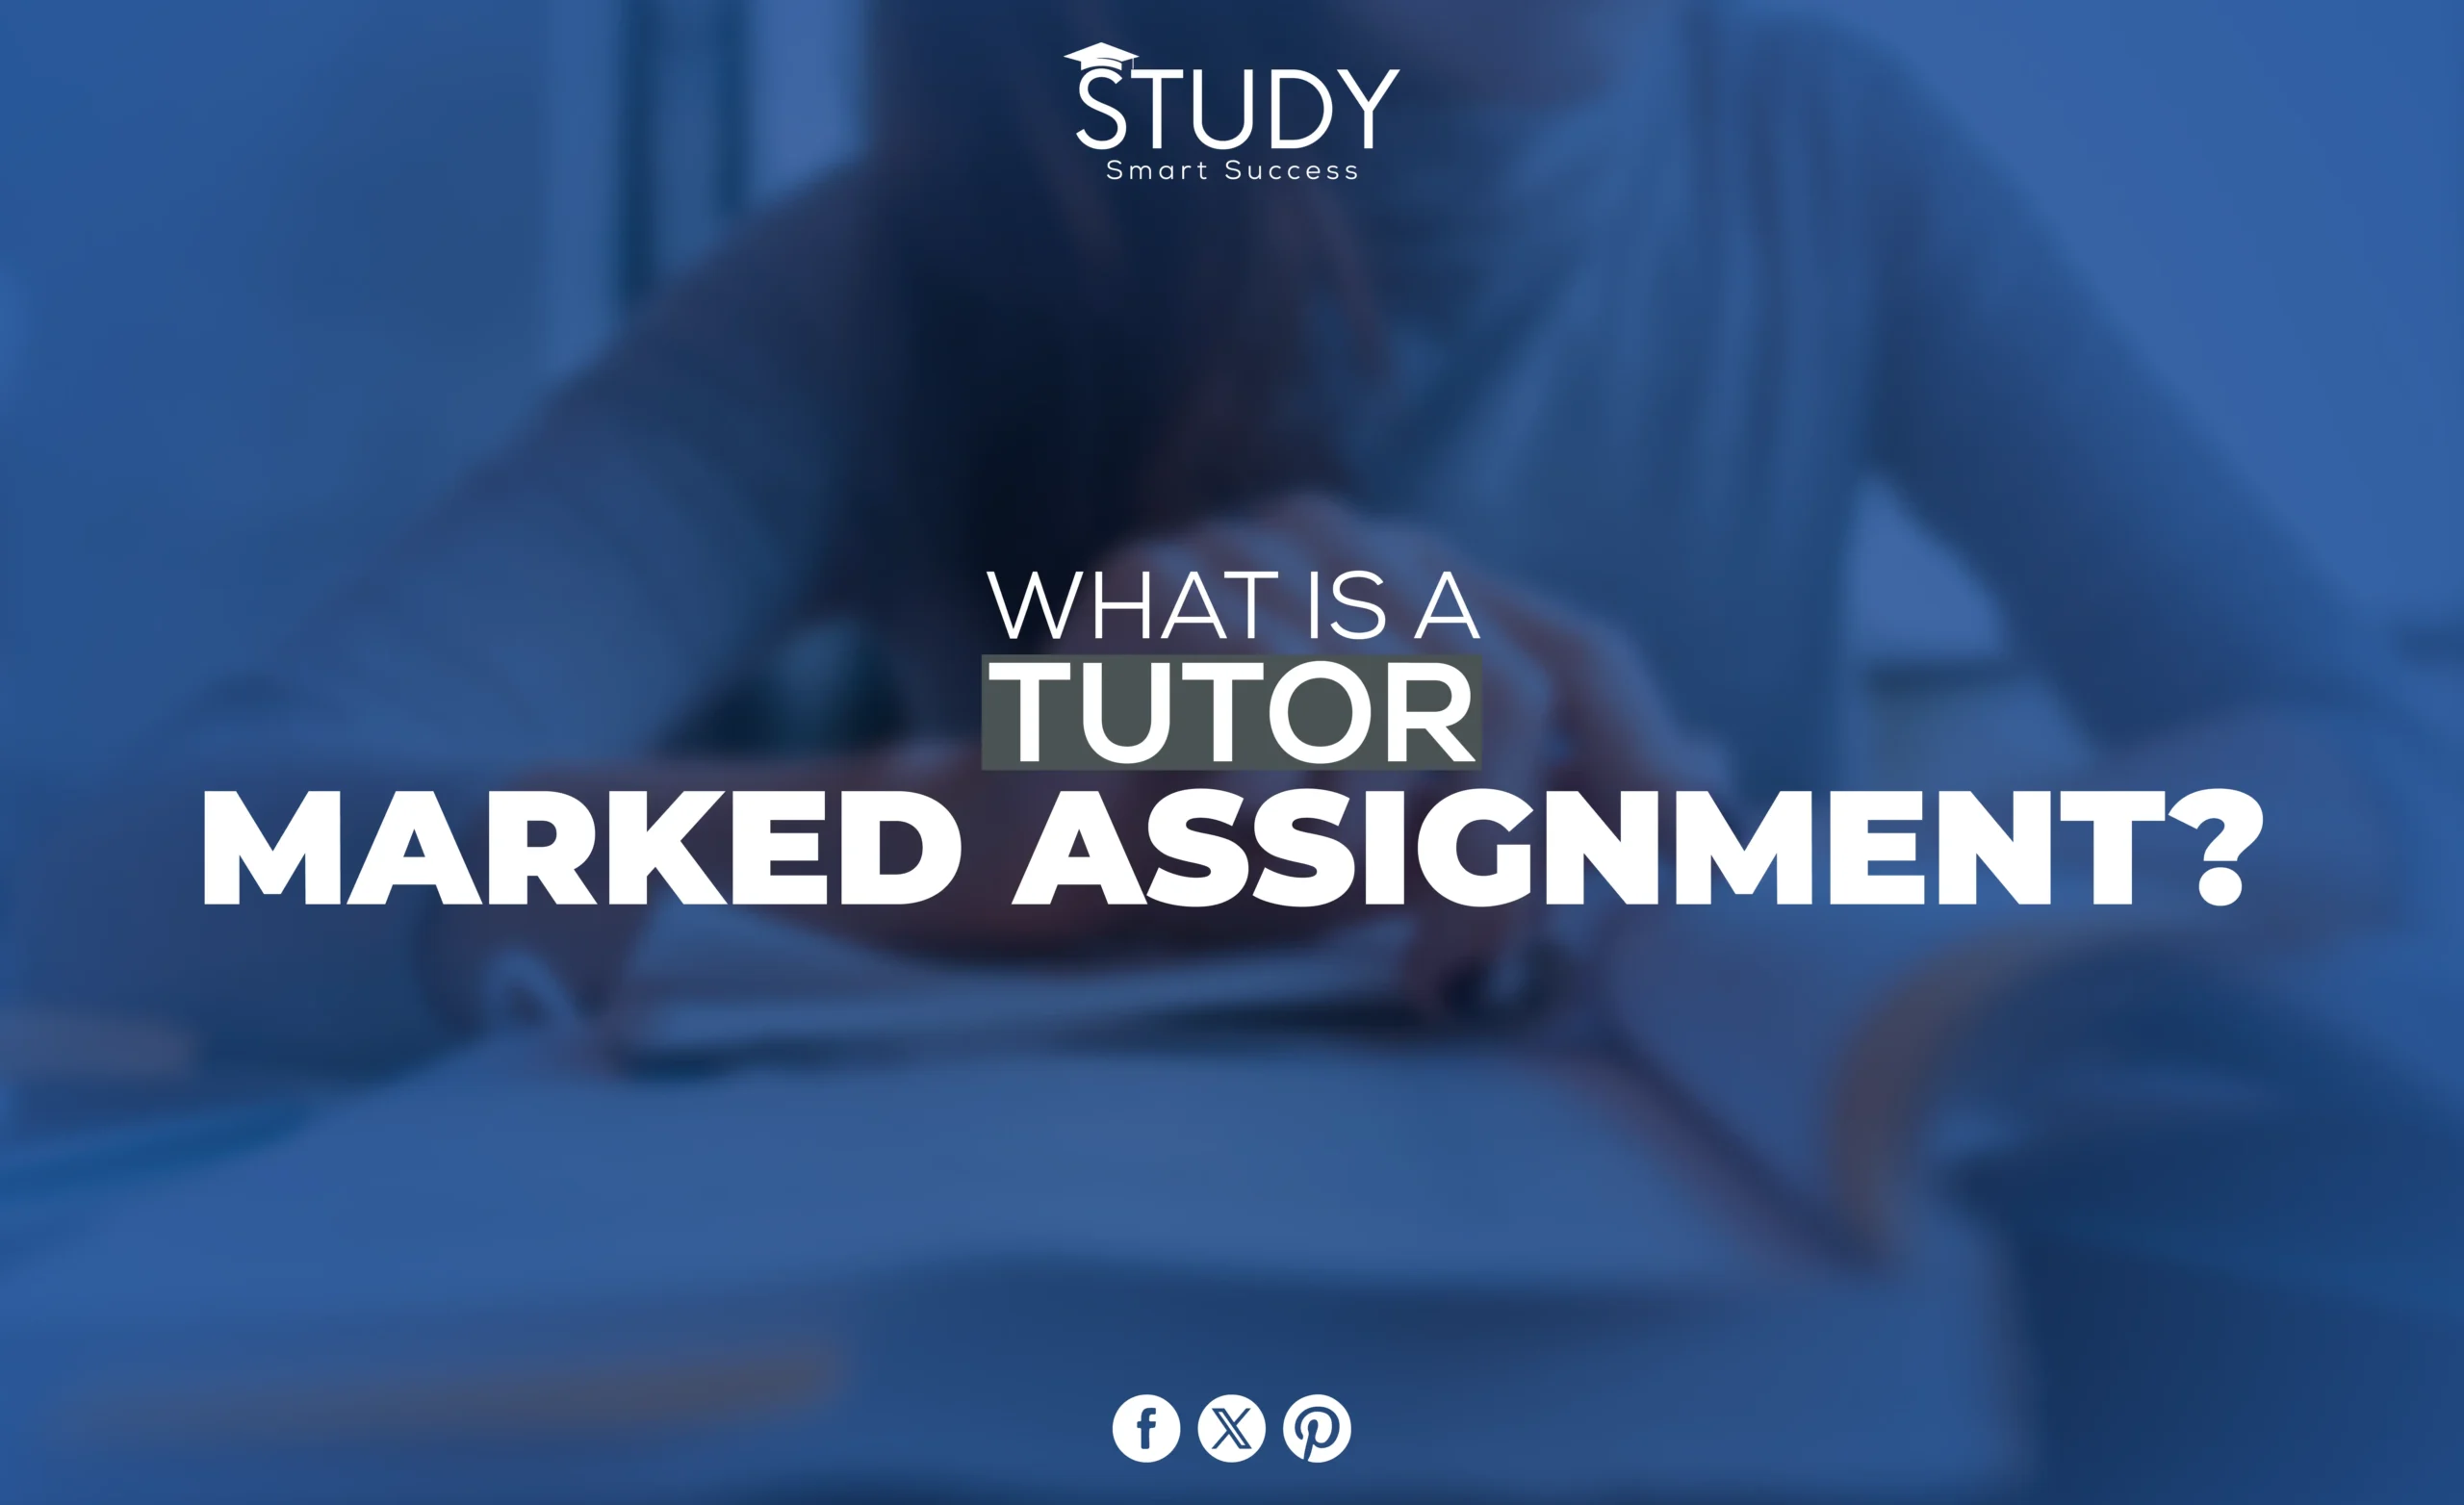 tutor marked assignment meaning